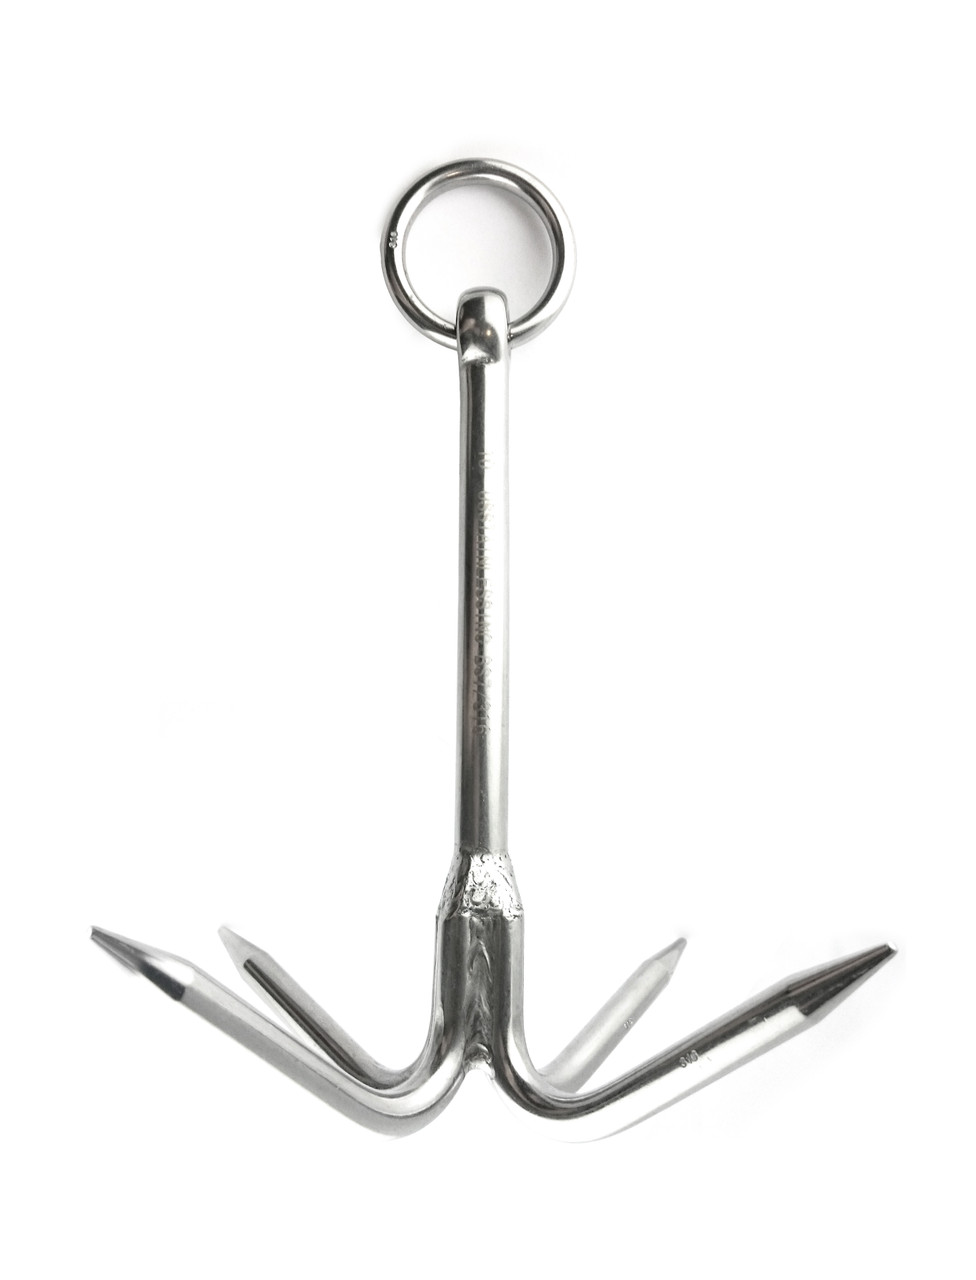 Stainless Steel 316 Hook Anchor 12.5 (315mm) Marine Grade Grapple  Grappling Hook - US Stainless